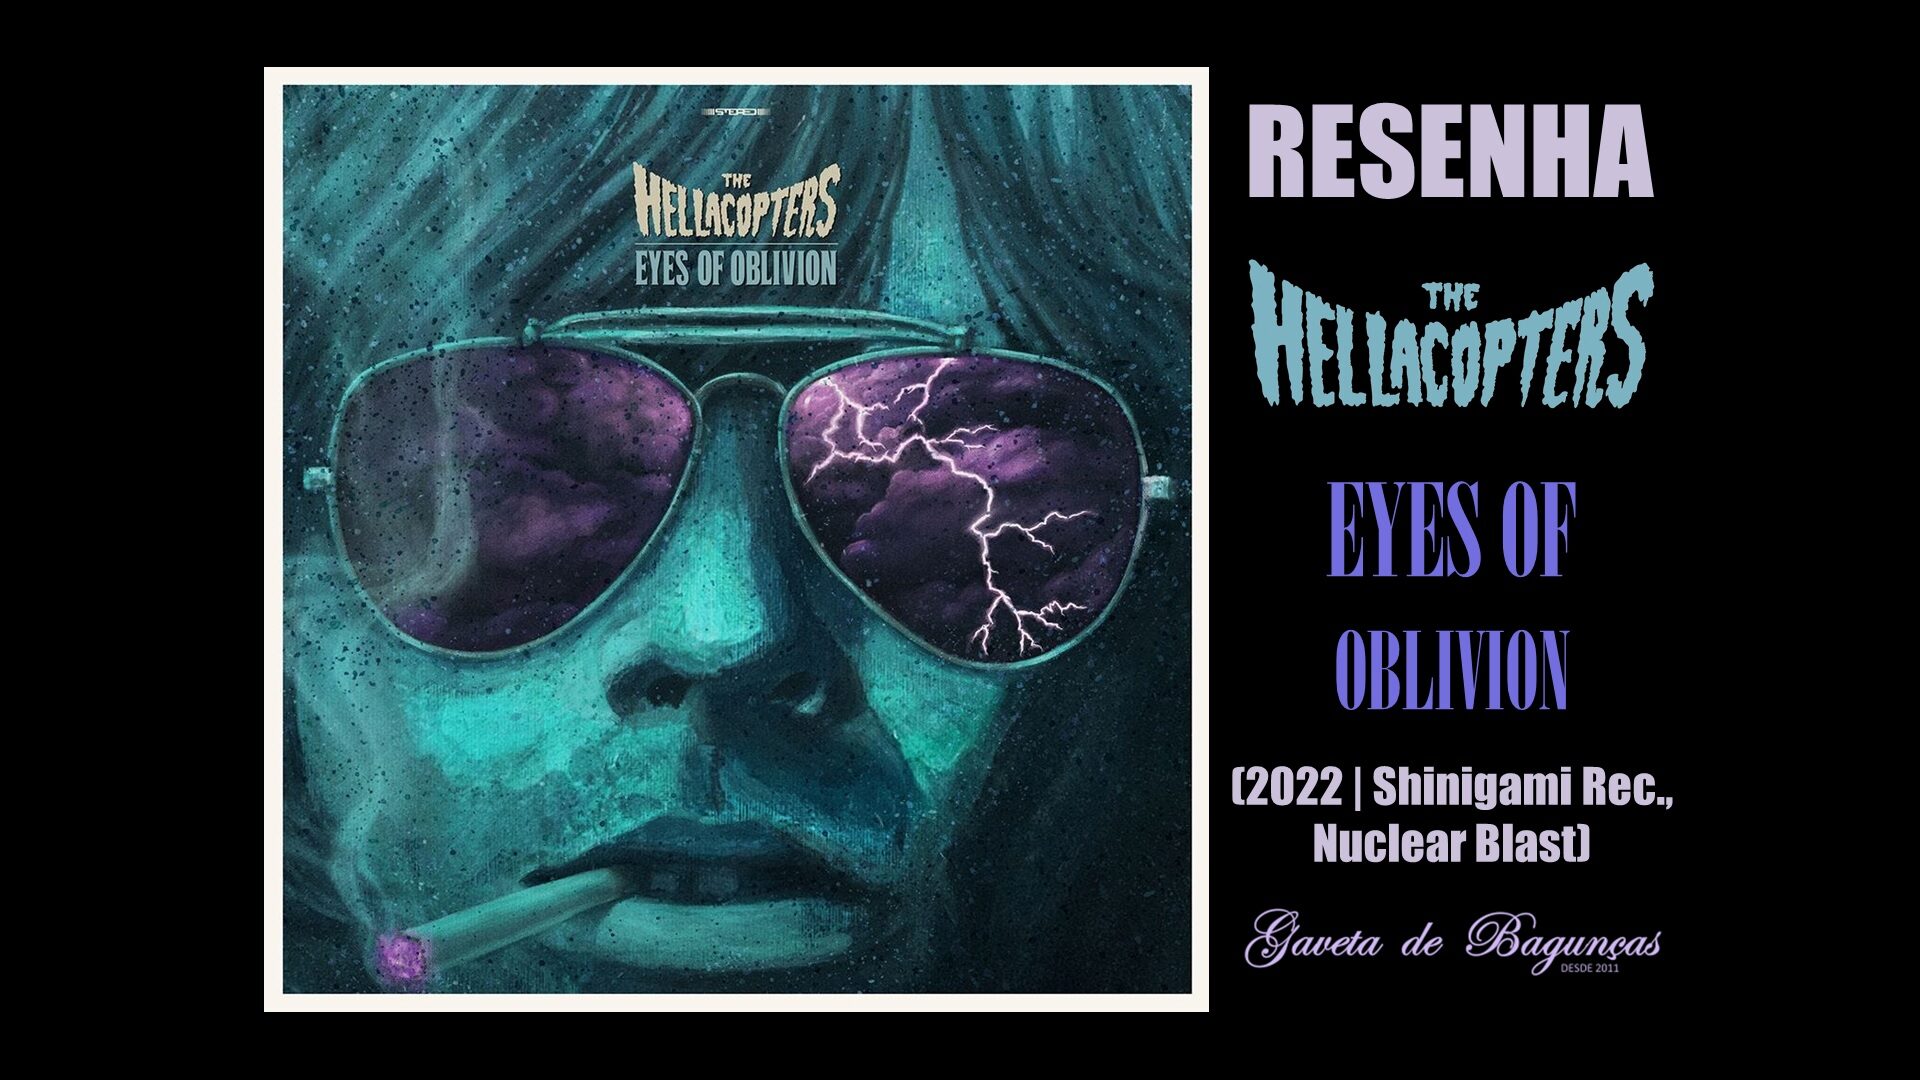 The Hellacopters - Eyes of Oblivion 2022 Shinigami Records Nuclear Blast